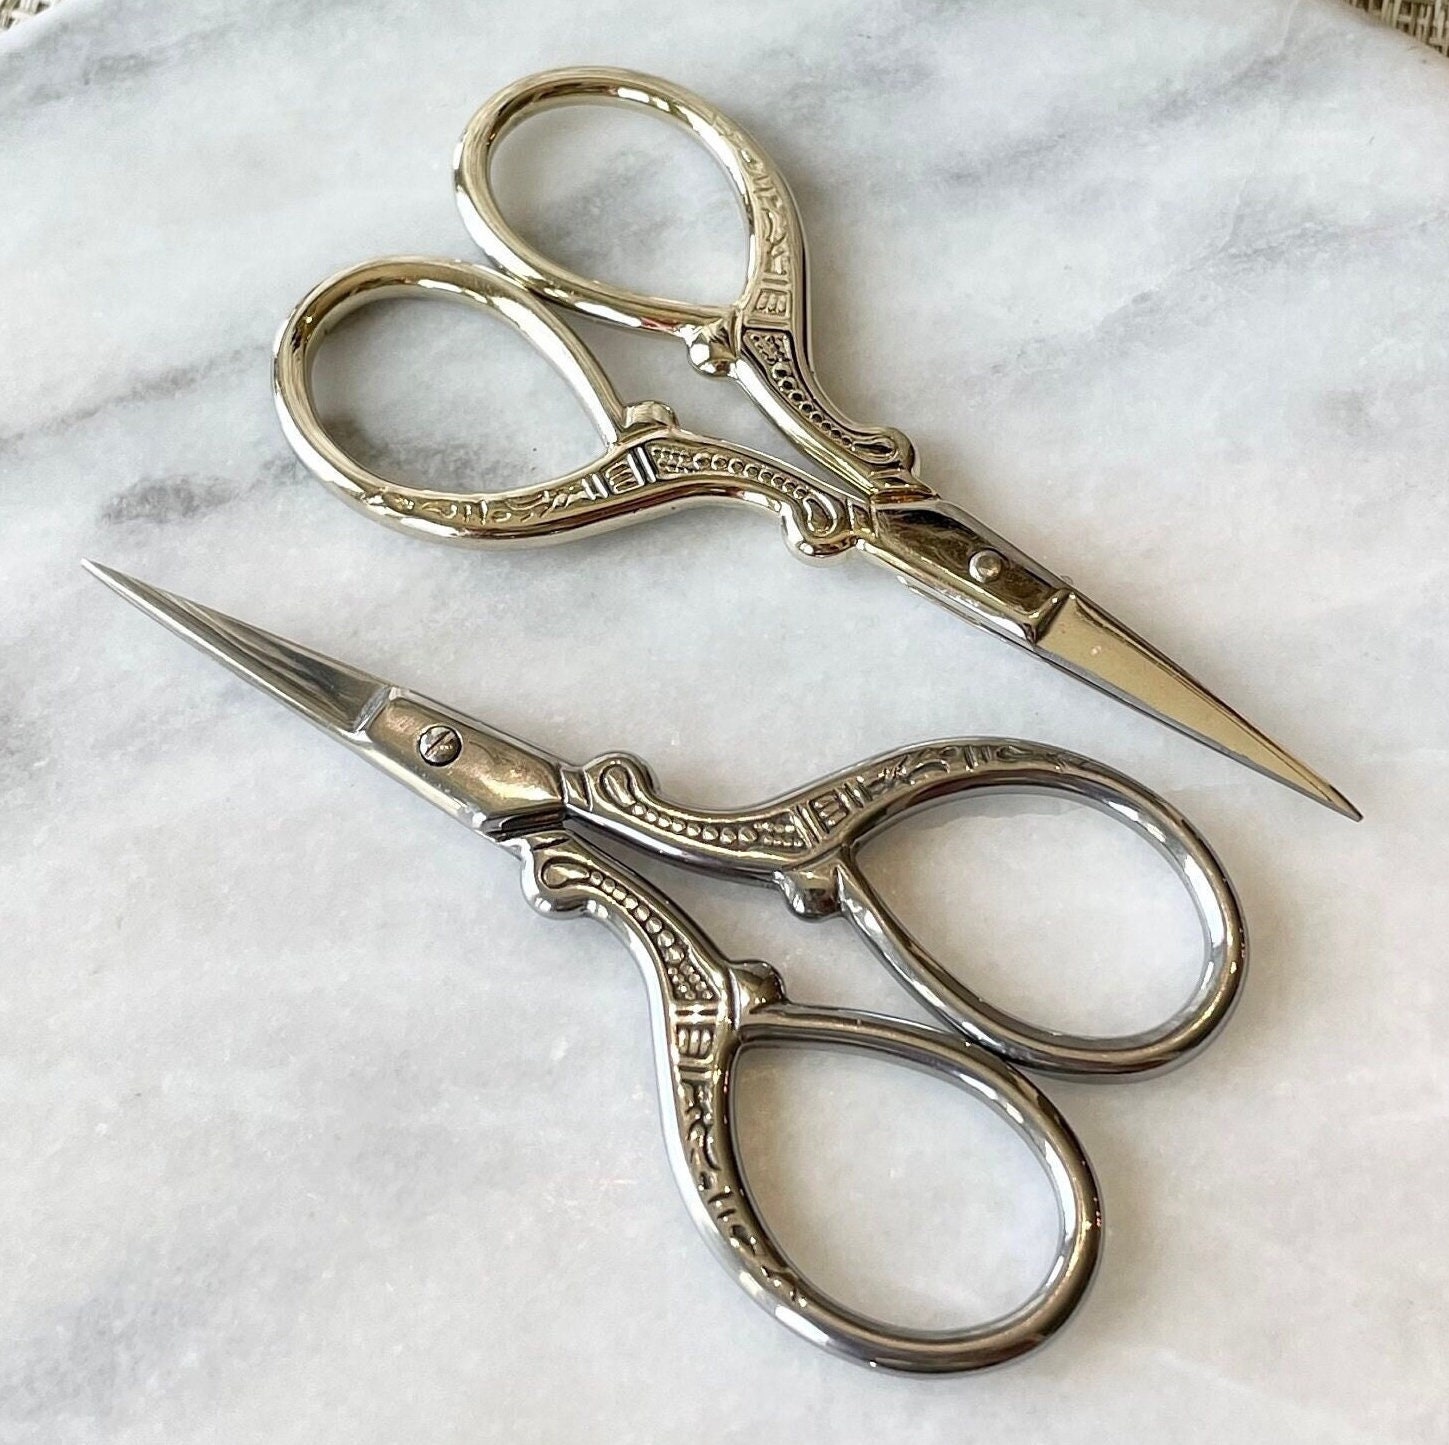 Embroidery Scissors, Stainless Steel Craft Scissors Decorative Engraving  Pattern Design Crafting Scissors for Embroidery Craft Needle Work(Silver)